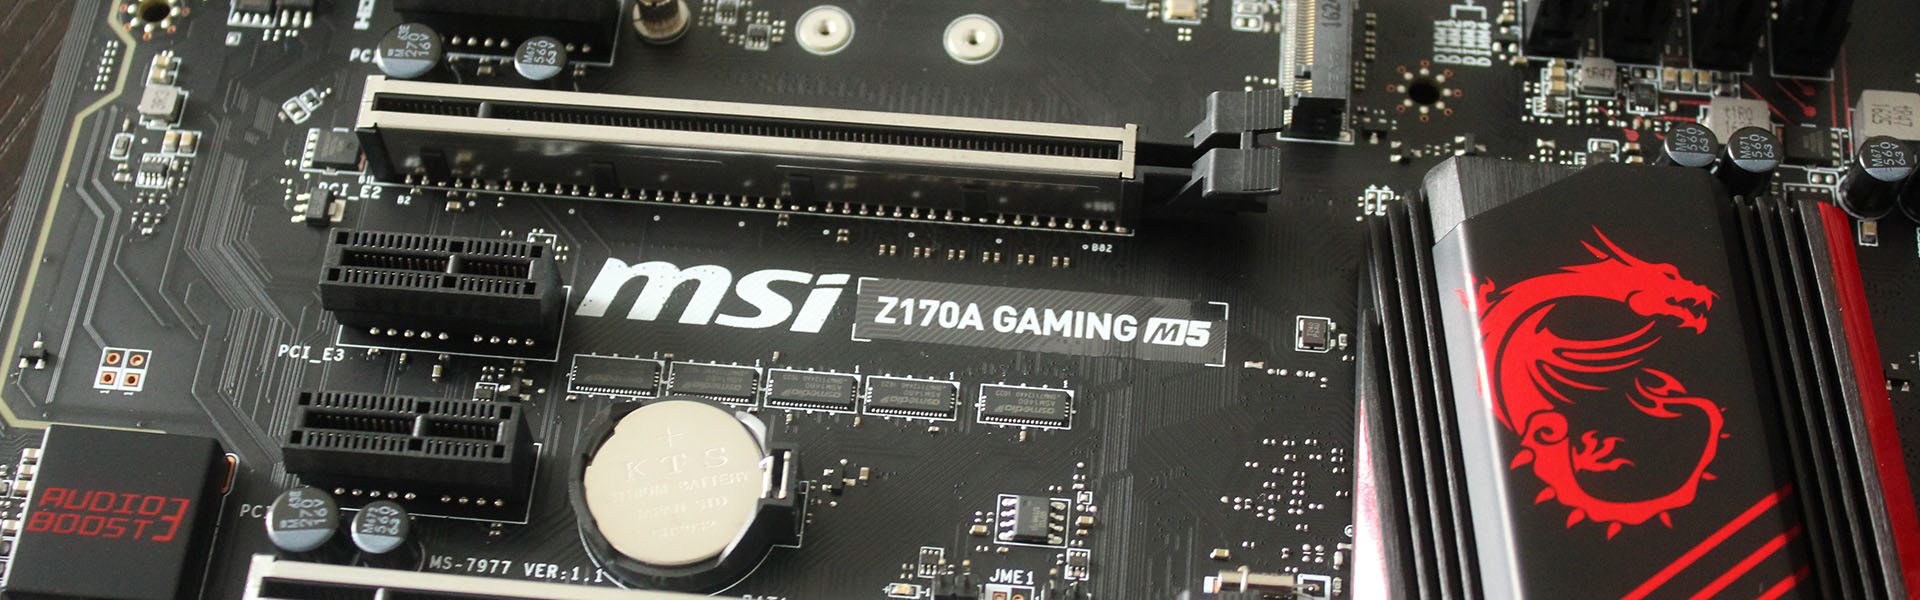 MSI Z170A Gaming M5 Motherboard Review 9